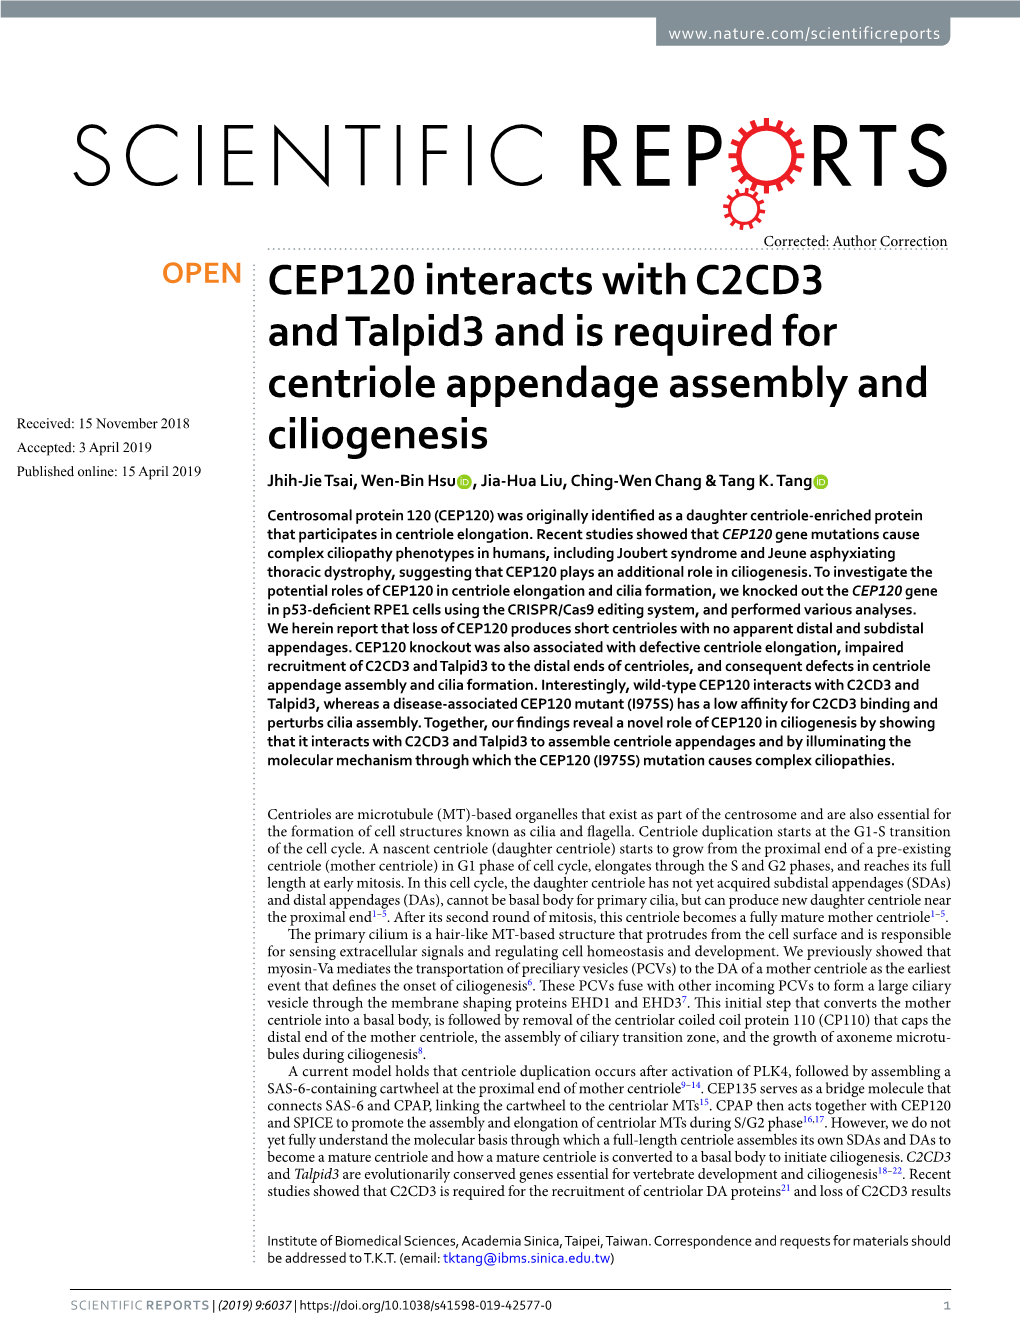 CEP120 Interacts with C2CD3 and Talpid3 and Is Required for Centriole